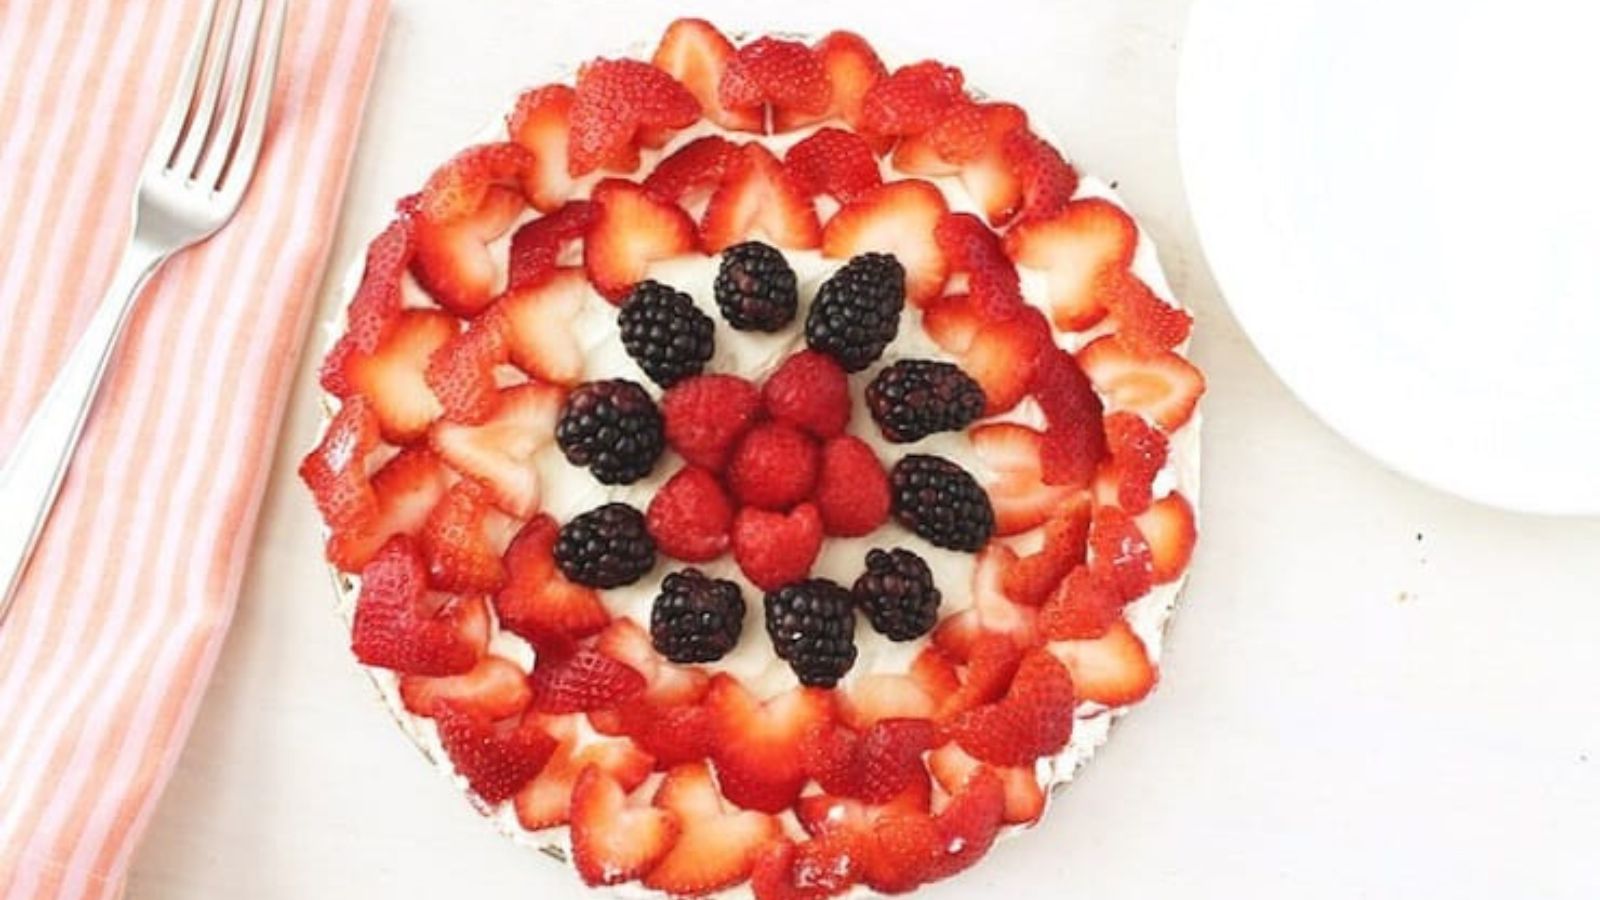 Indulge in 18 Easy No-Bake Desserts for Your Weeknight Treats